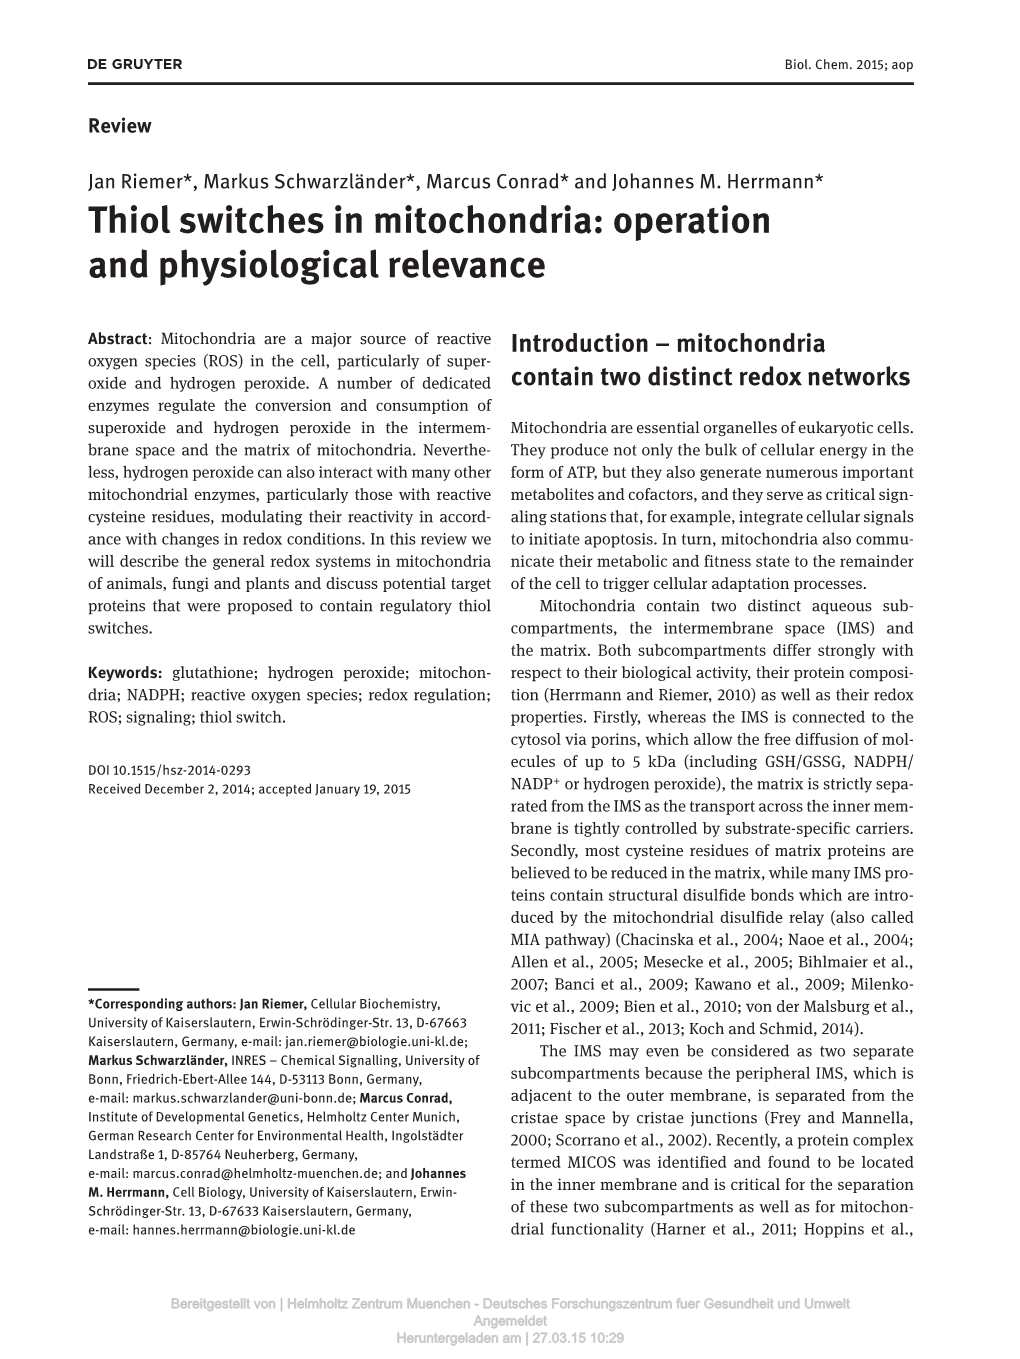 Thiol Switches in Mitochondria: Operation and Physiological Relevance